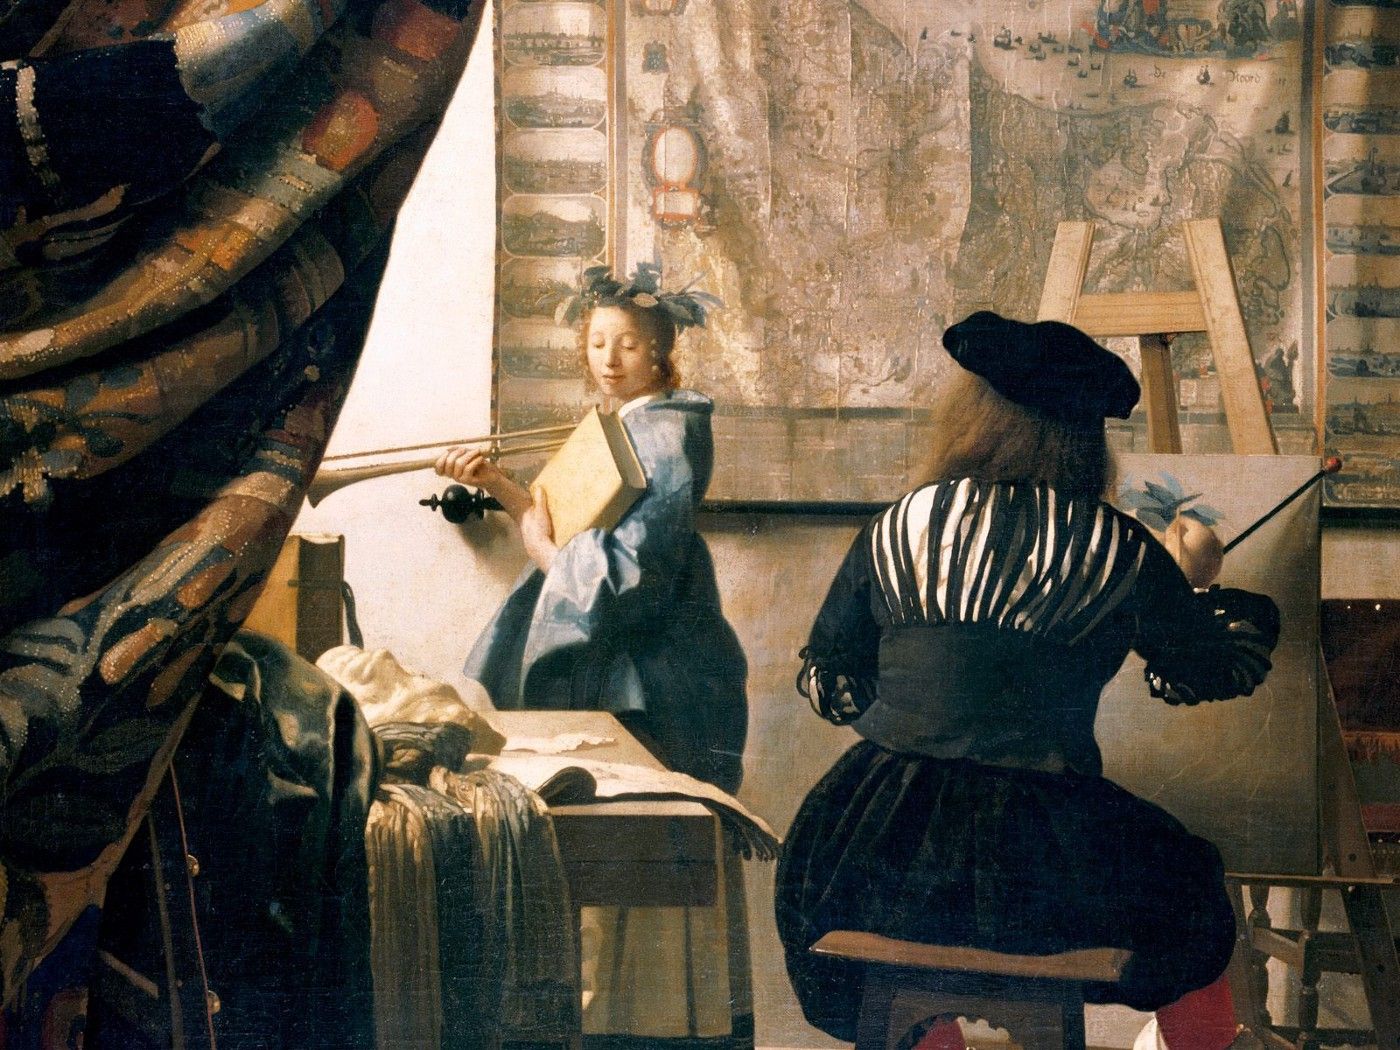 Oil painting depicting a painter in the setting of drawing another artist in their element.